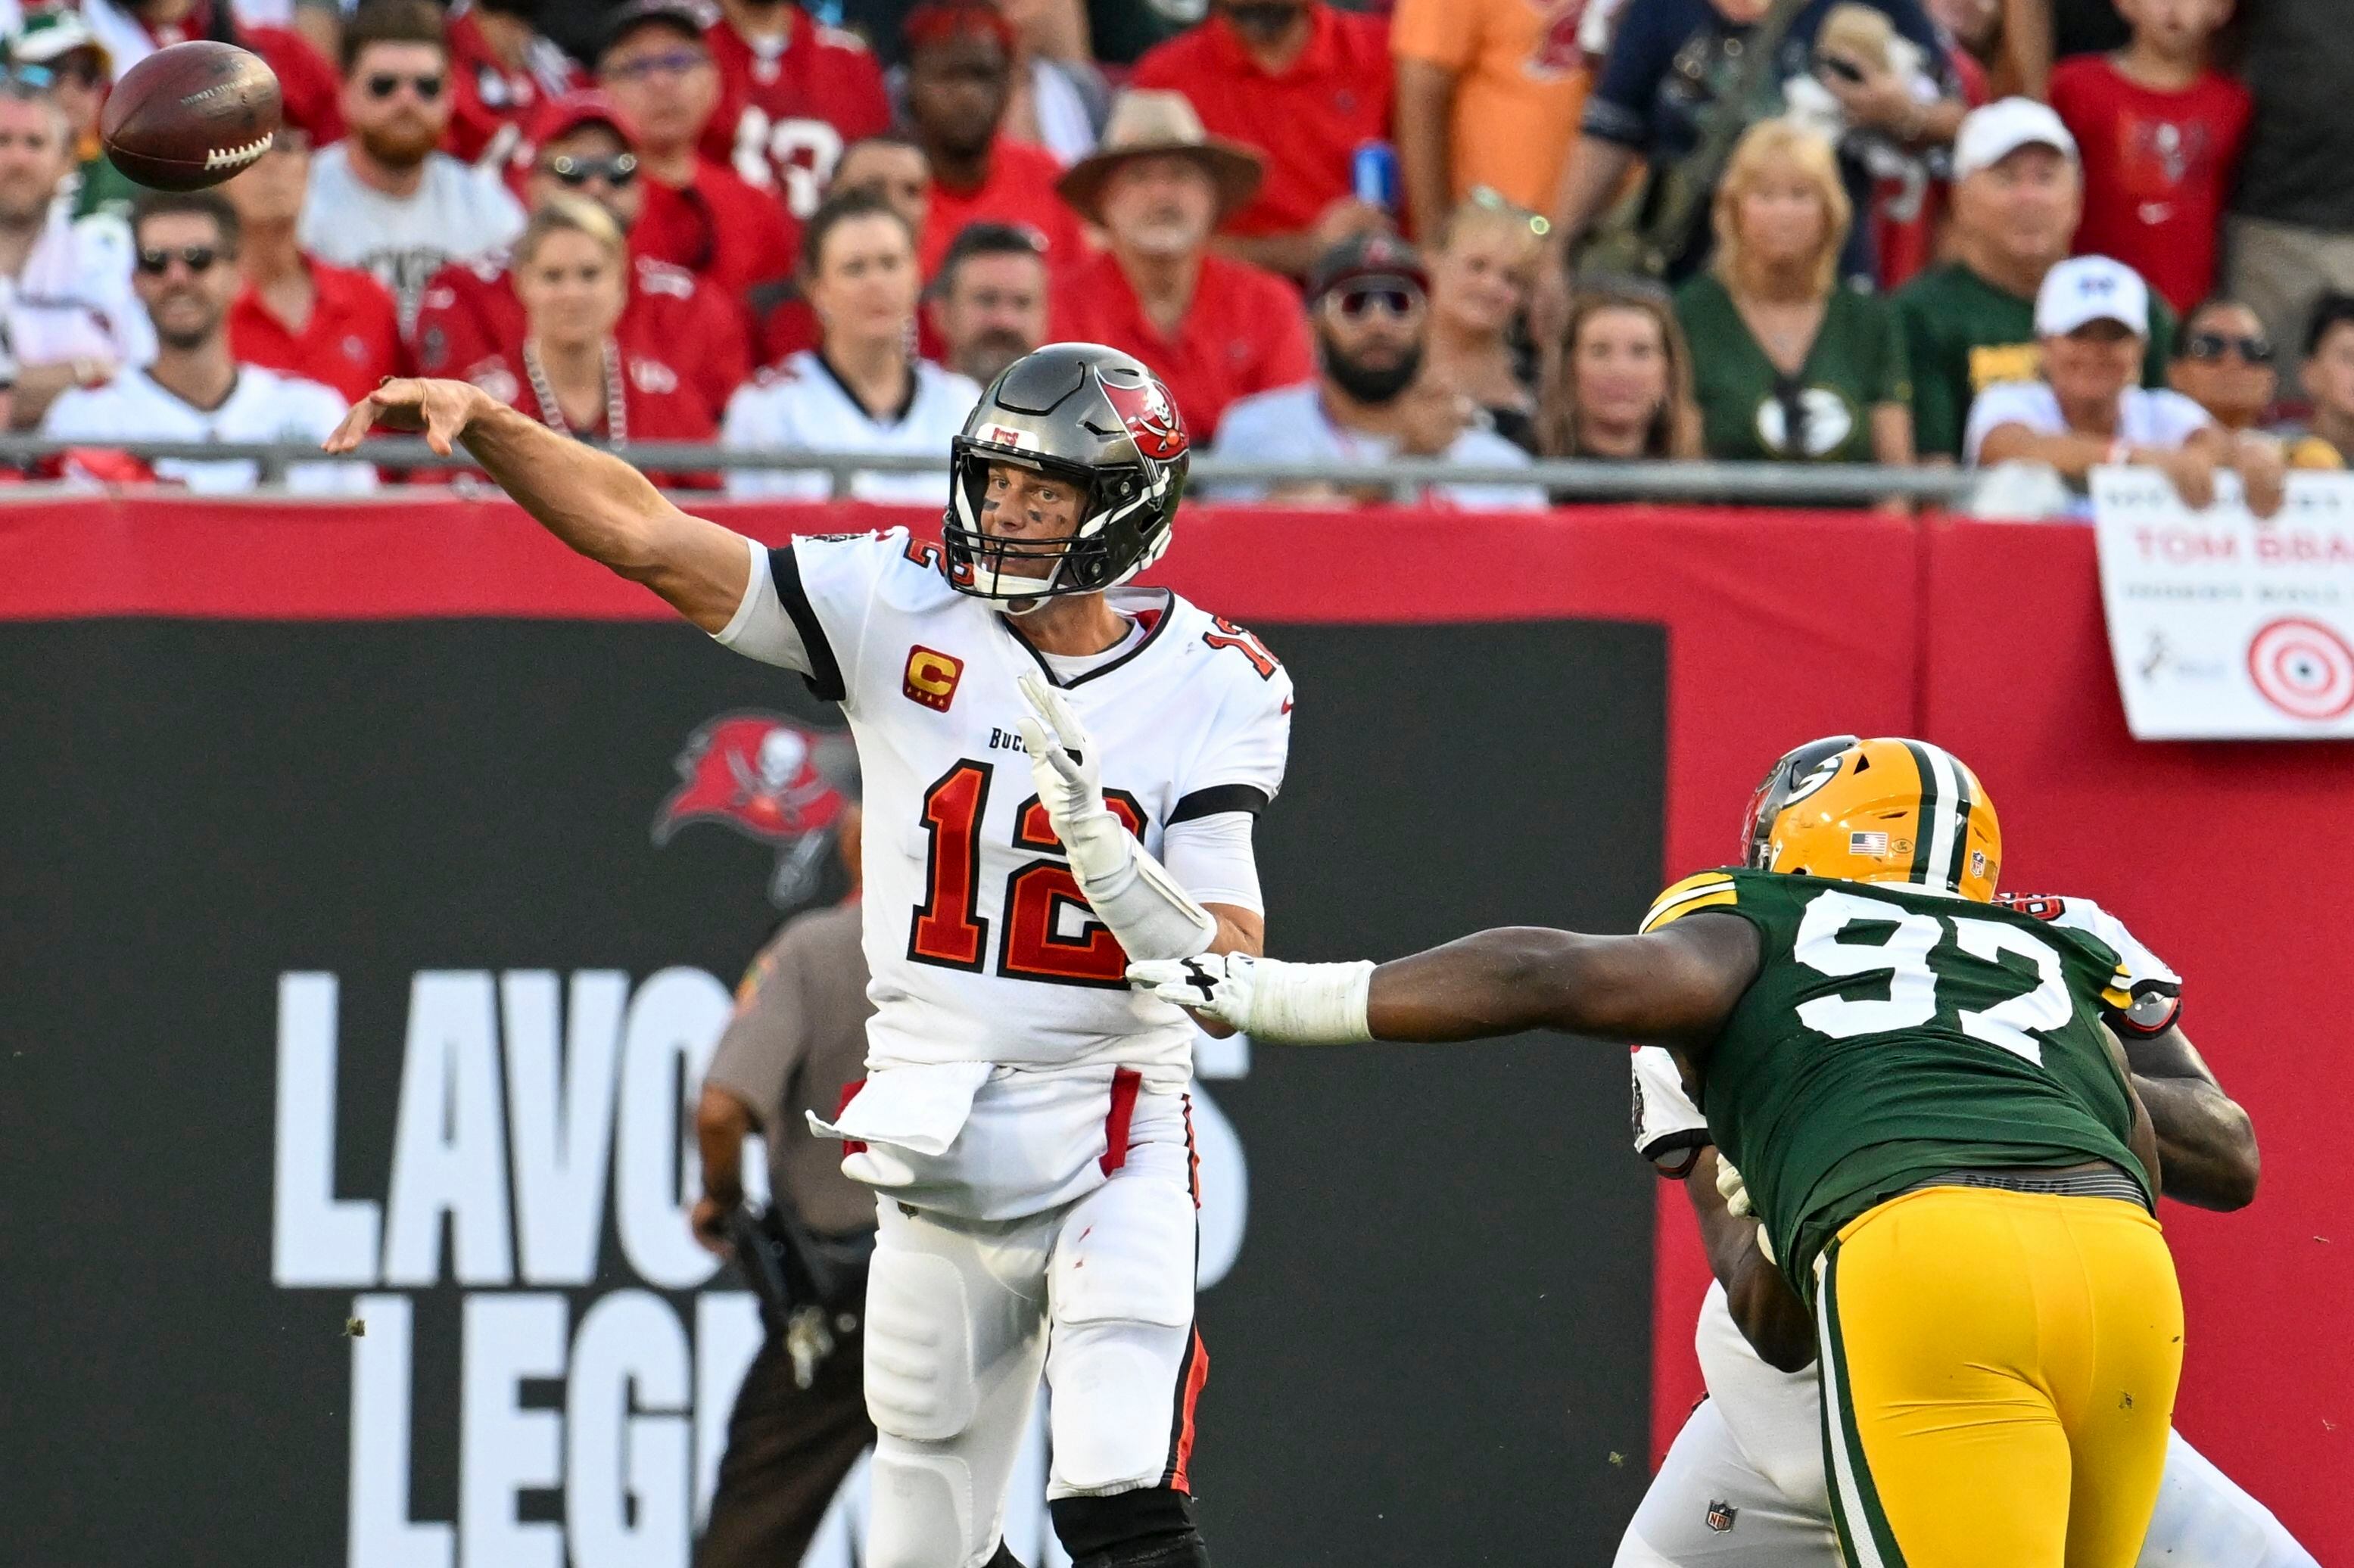 Packers hold on to beat Buccaneers, 14-12